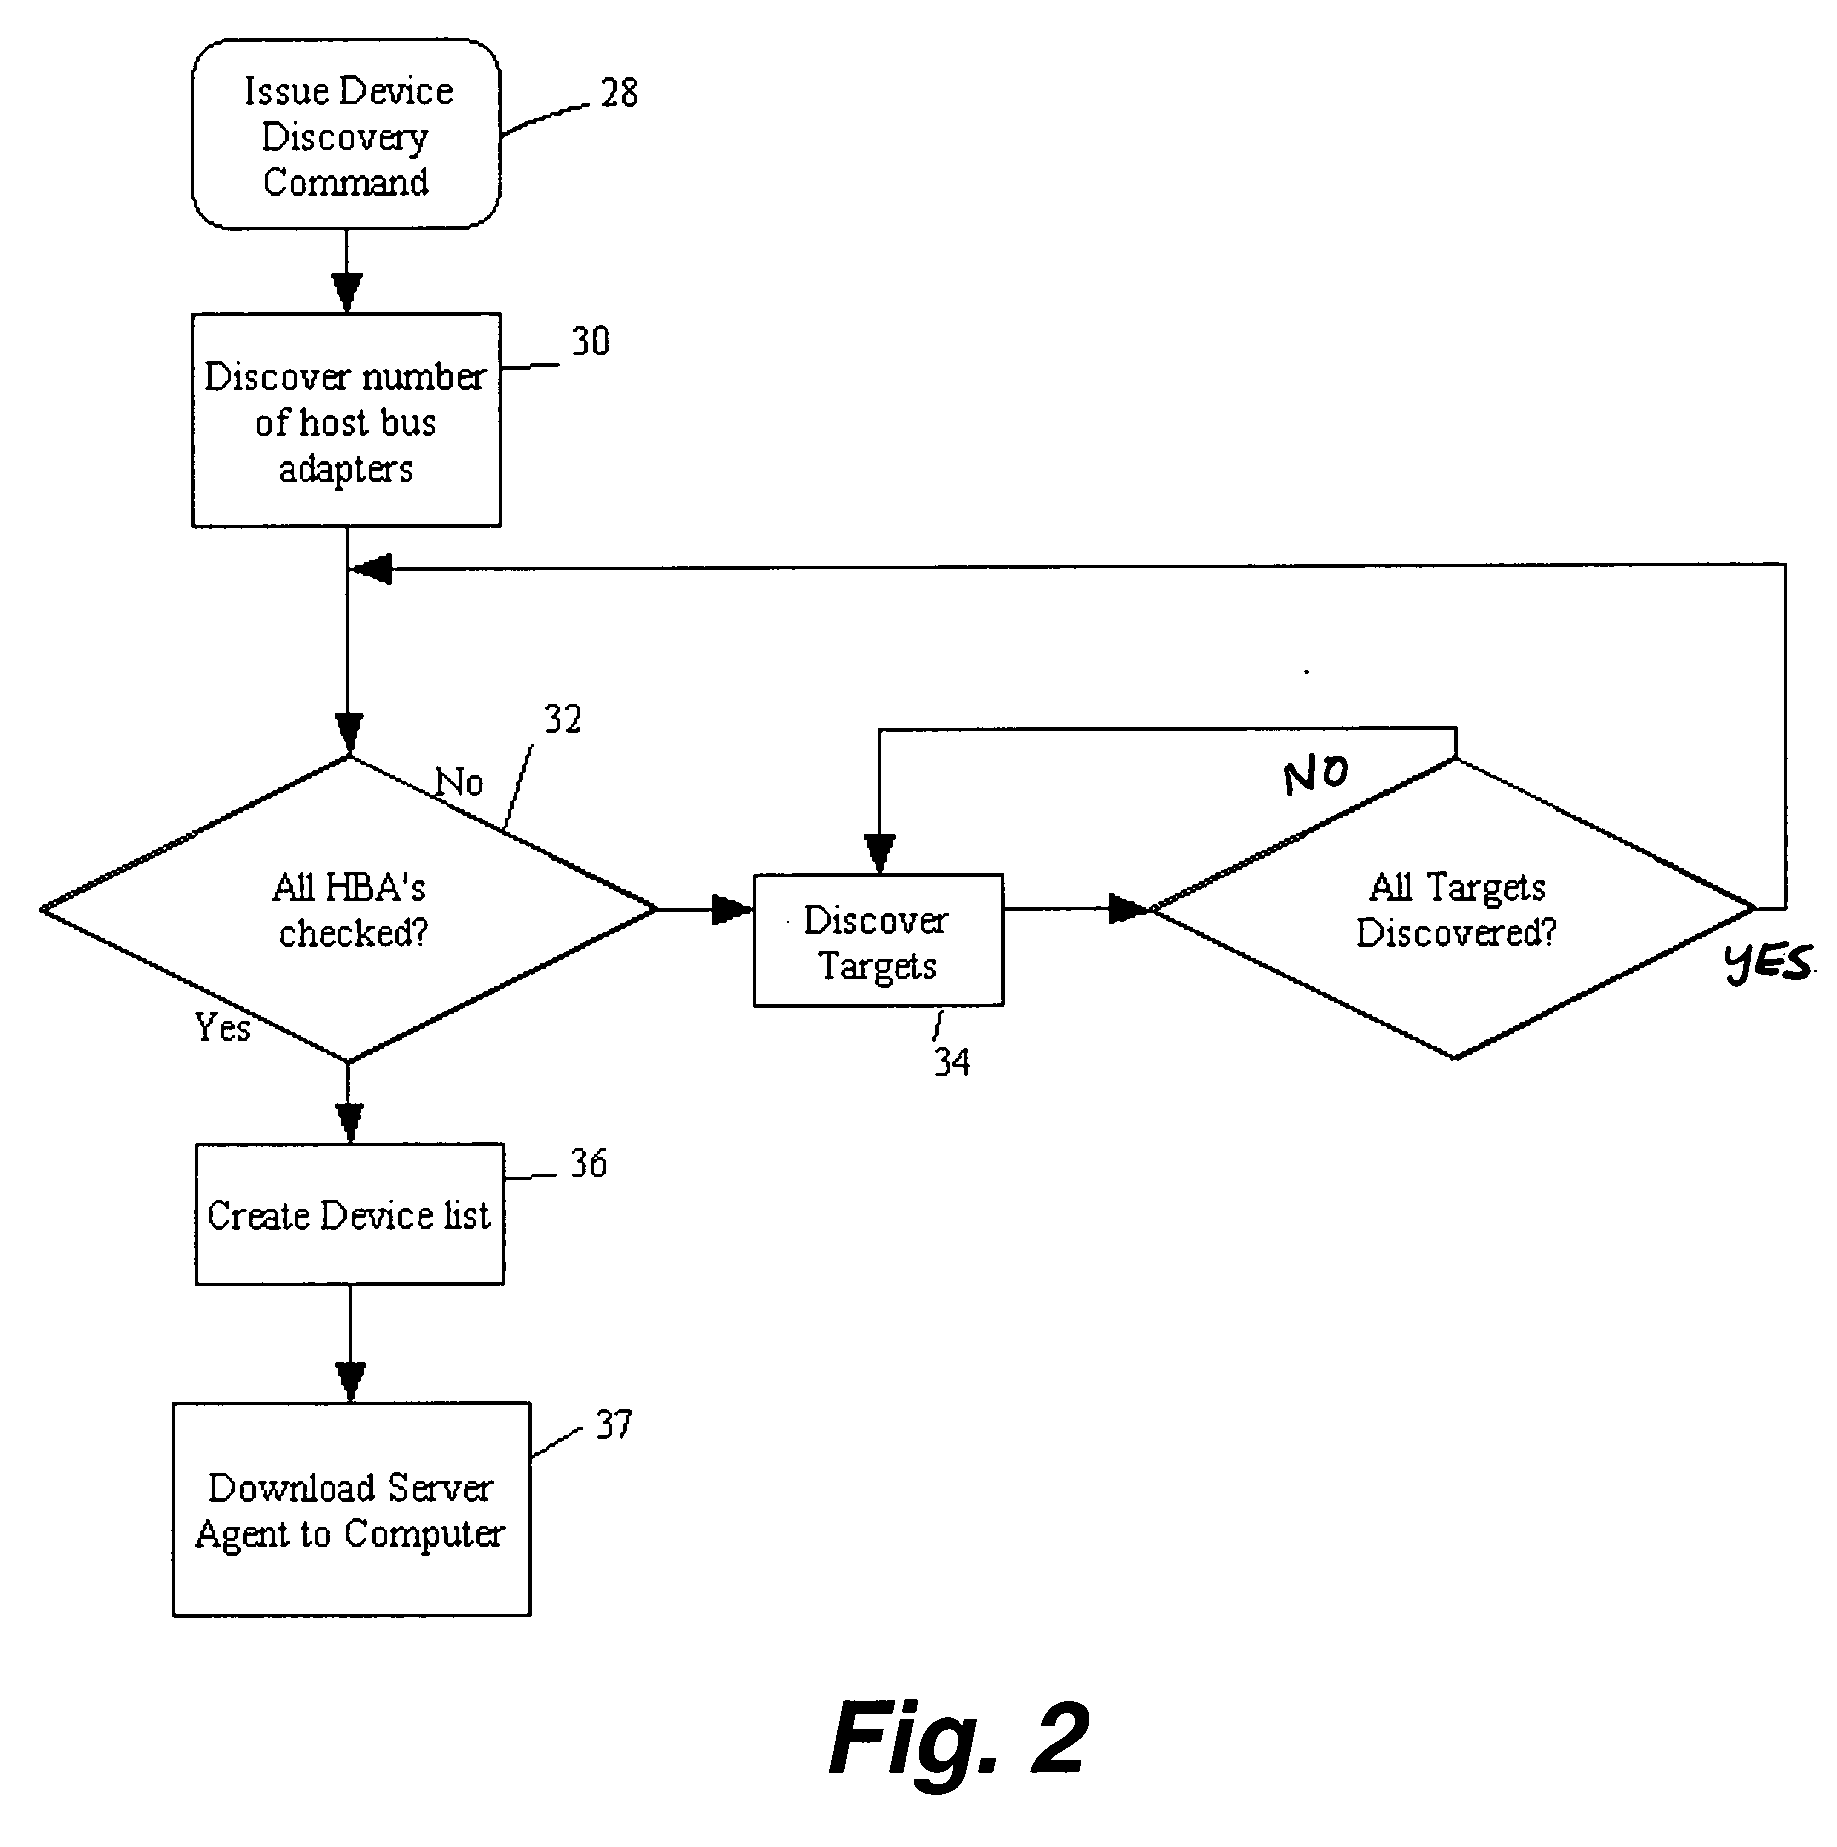 Method and apparatus for monitoring data storage devices